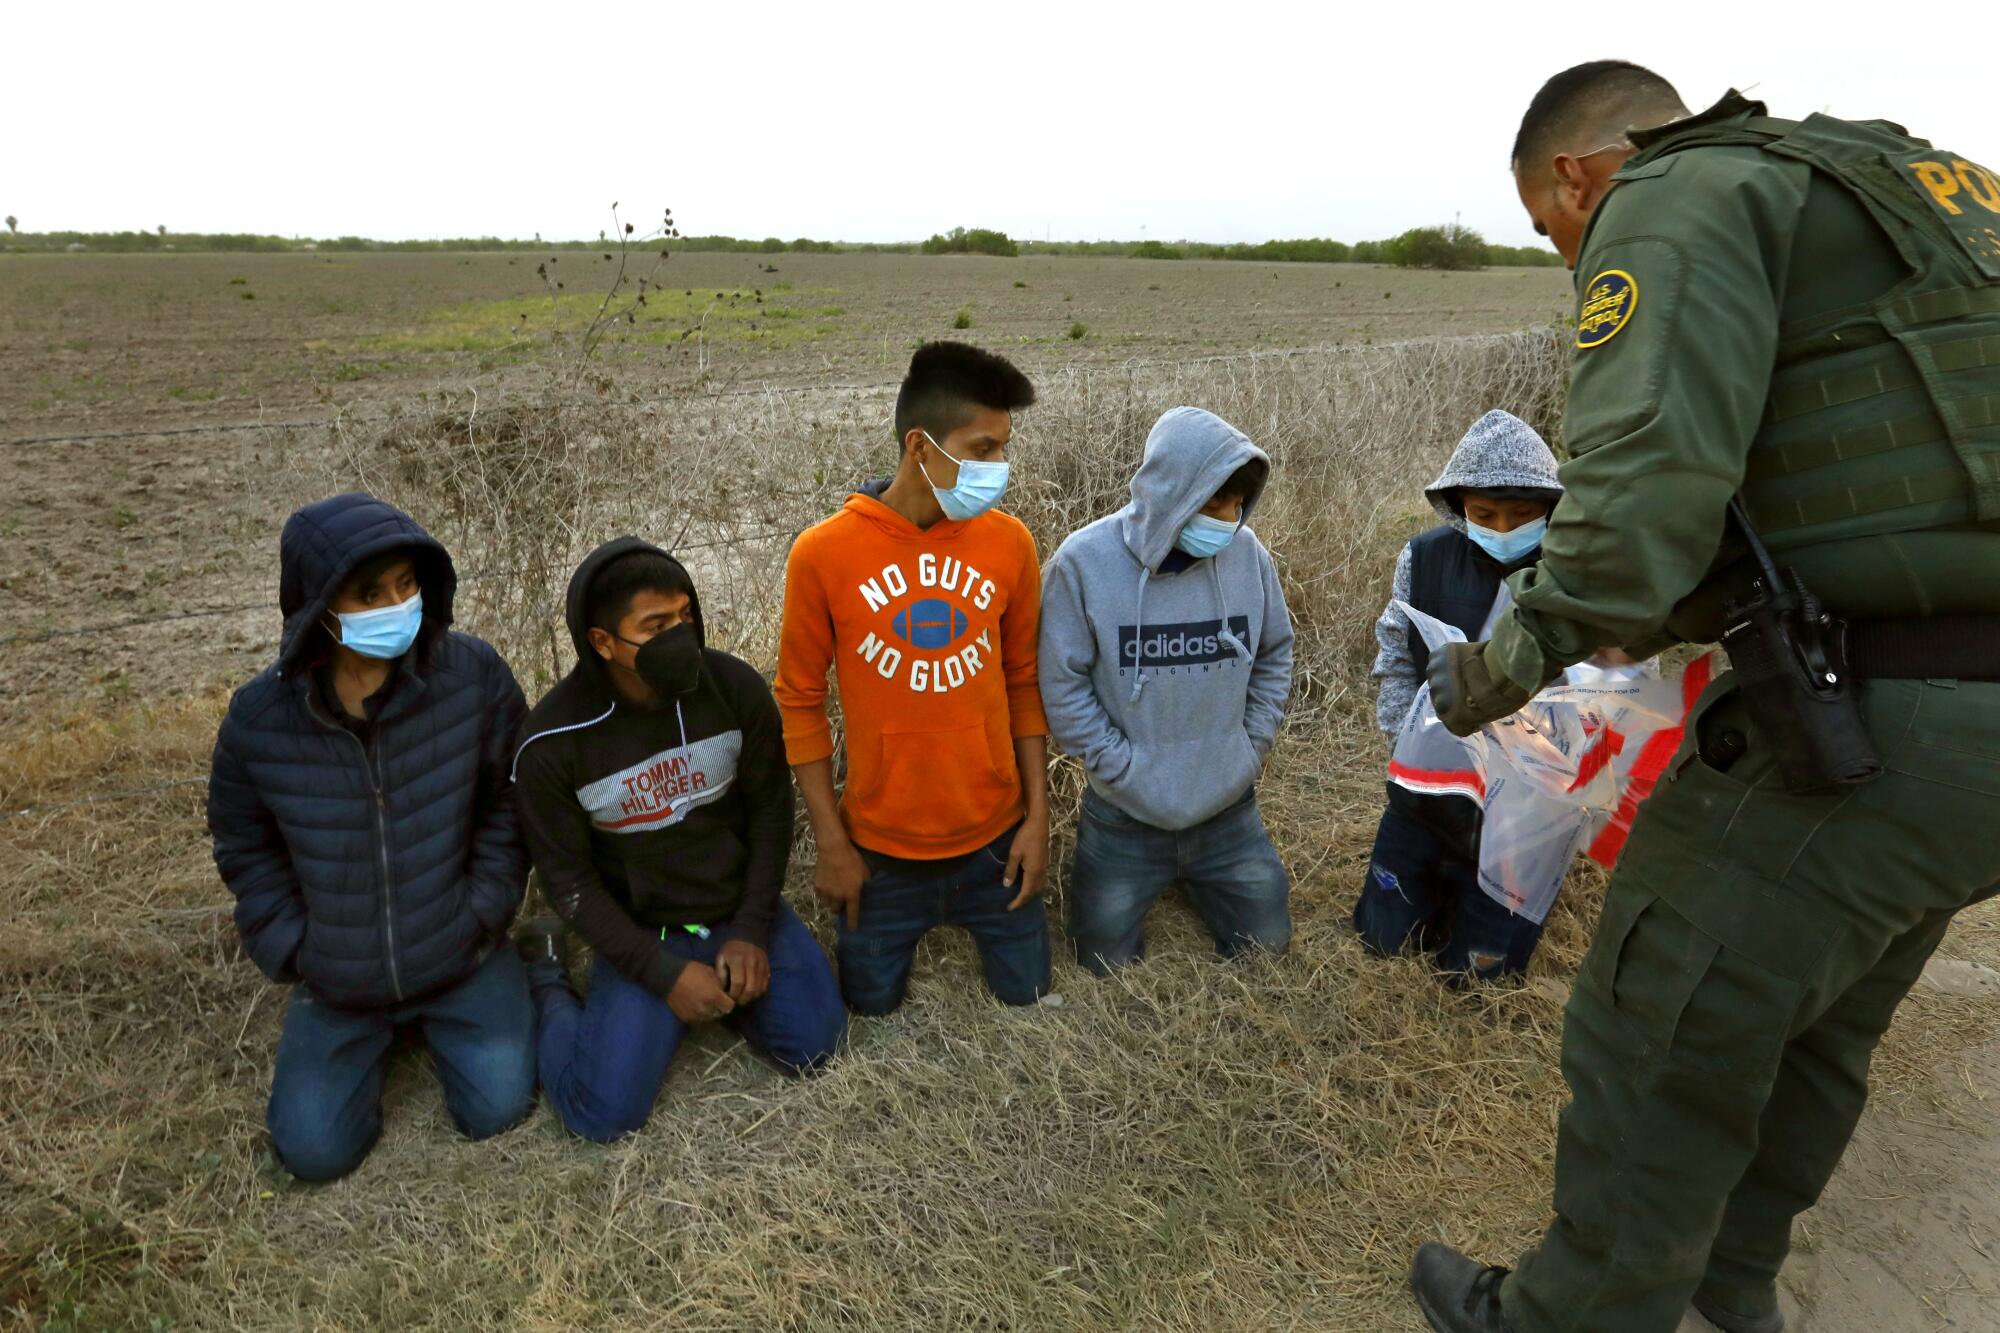 Young migrants on their knees in front of a border agent